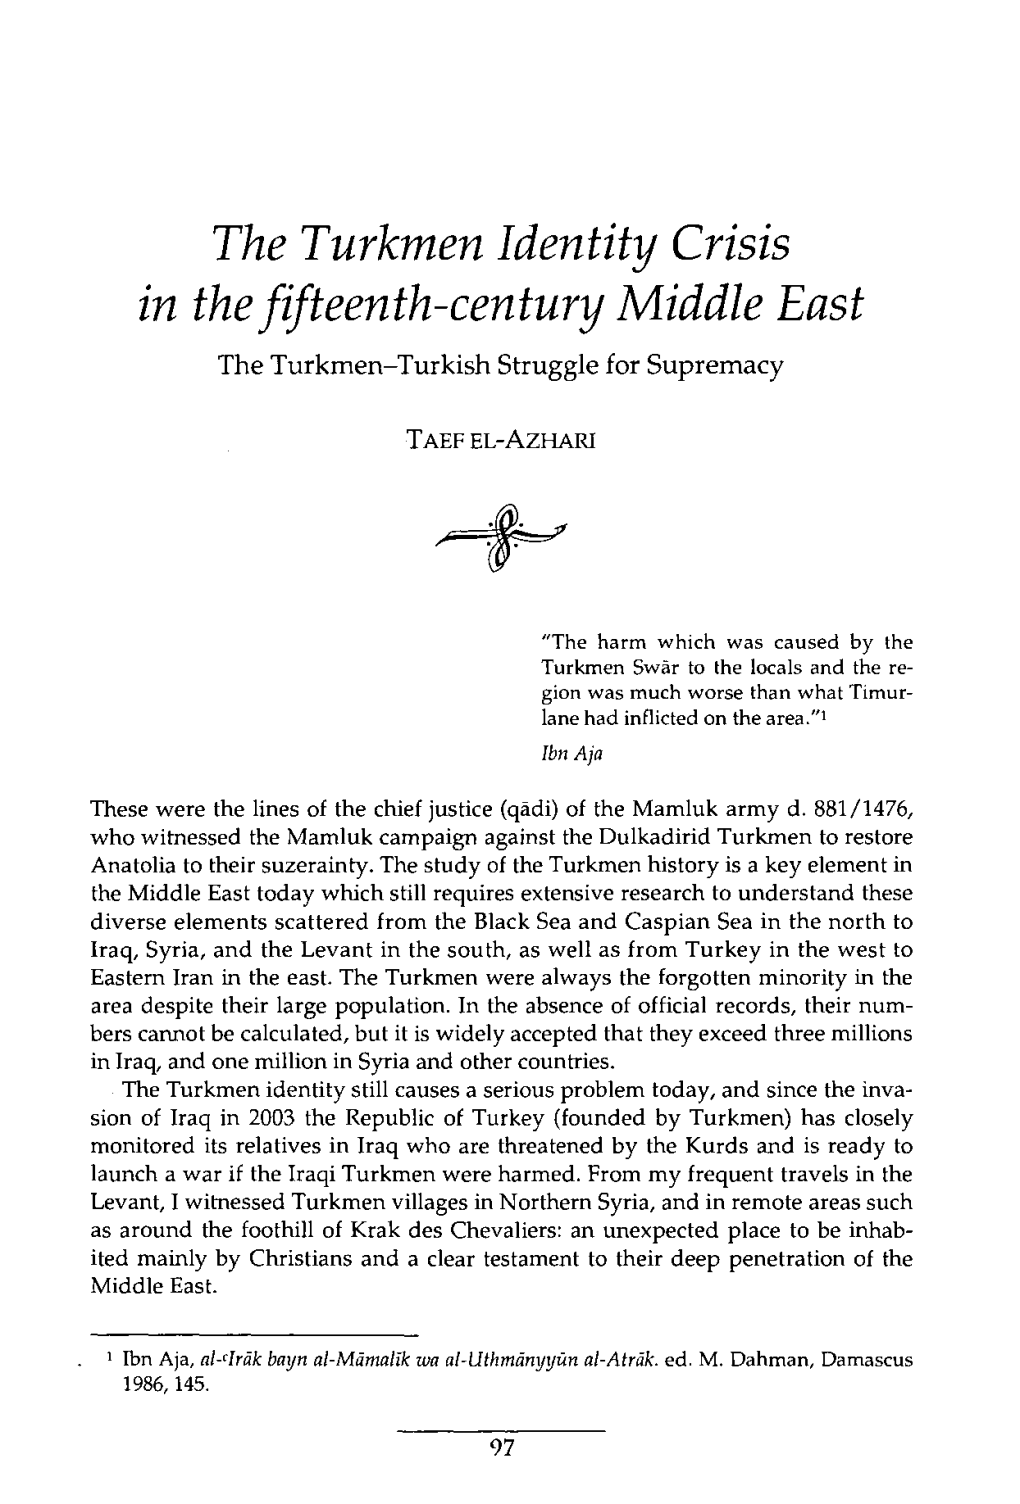 The Turkmen Identity Crisis in the Fifteenth-Century Middle East